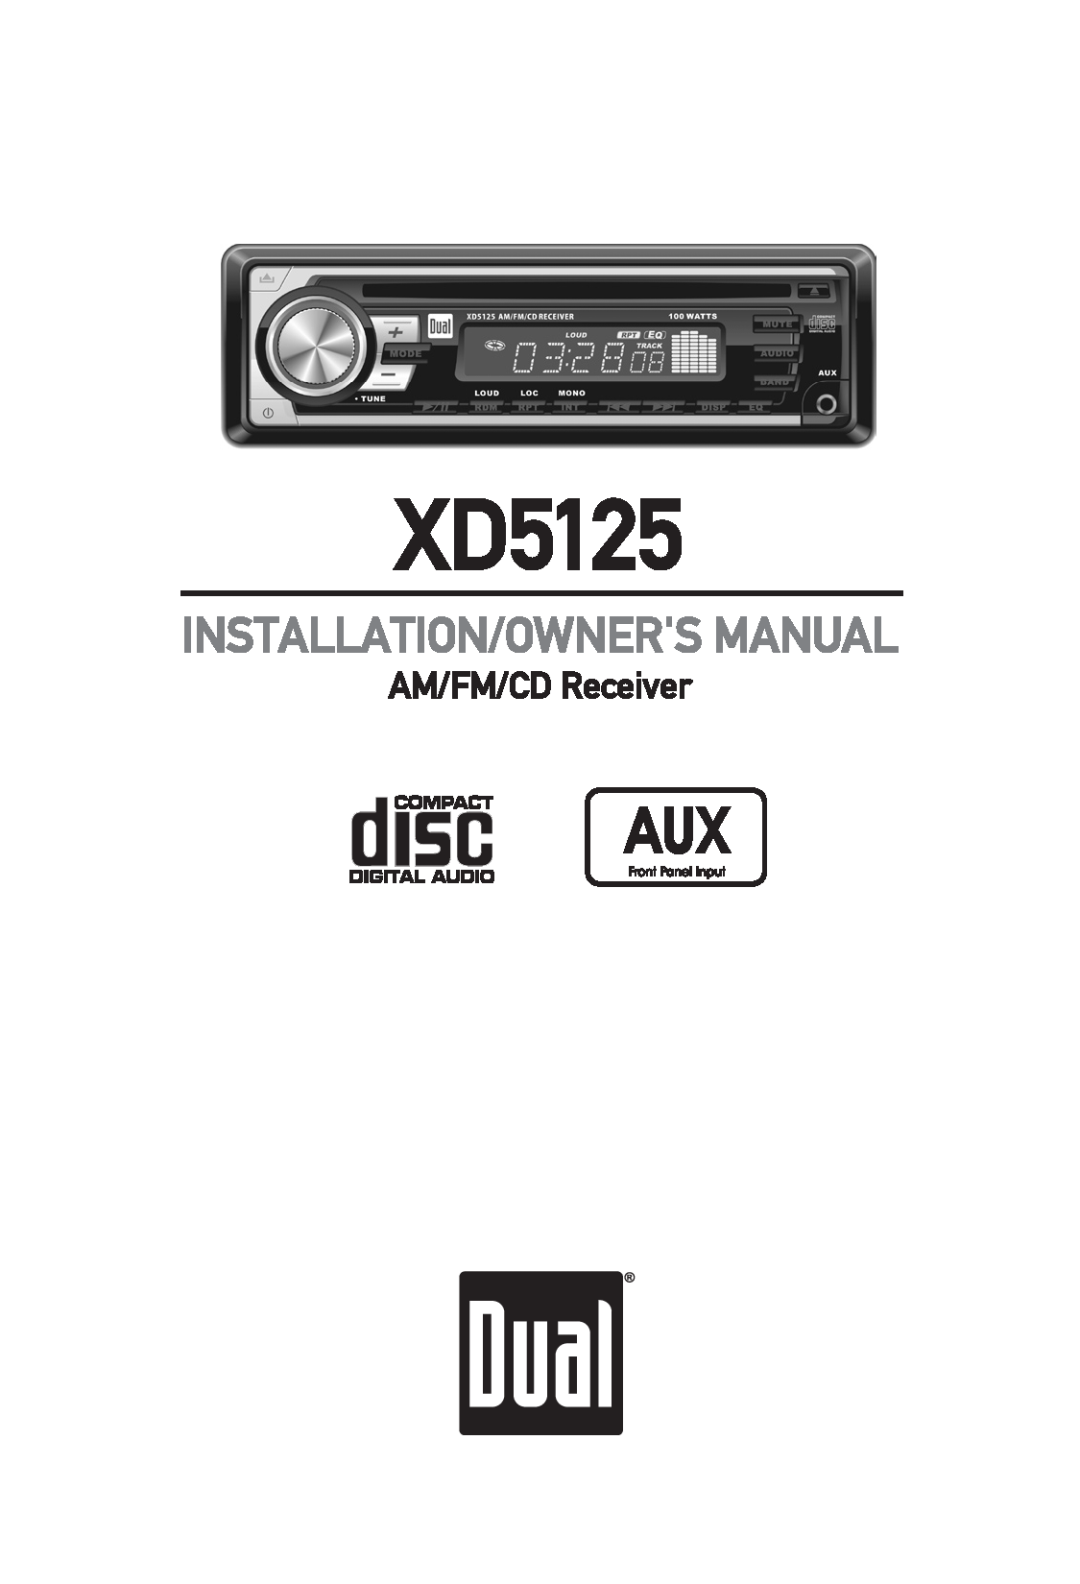 Dual XD5125 owner manual AM/FM/CD Receiver, Installation/Owners Manual 